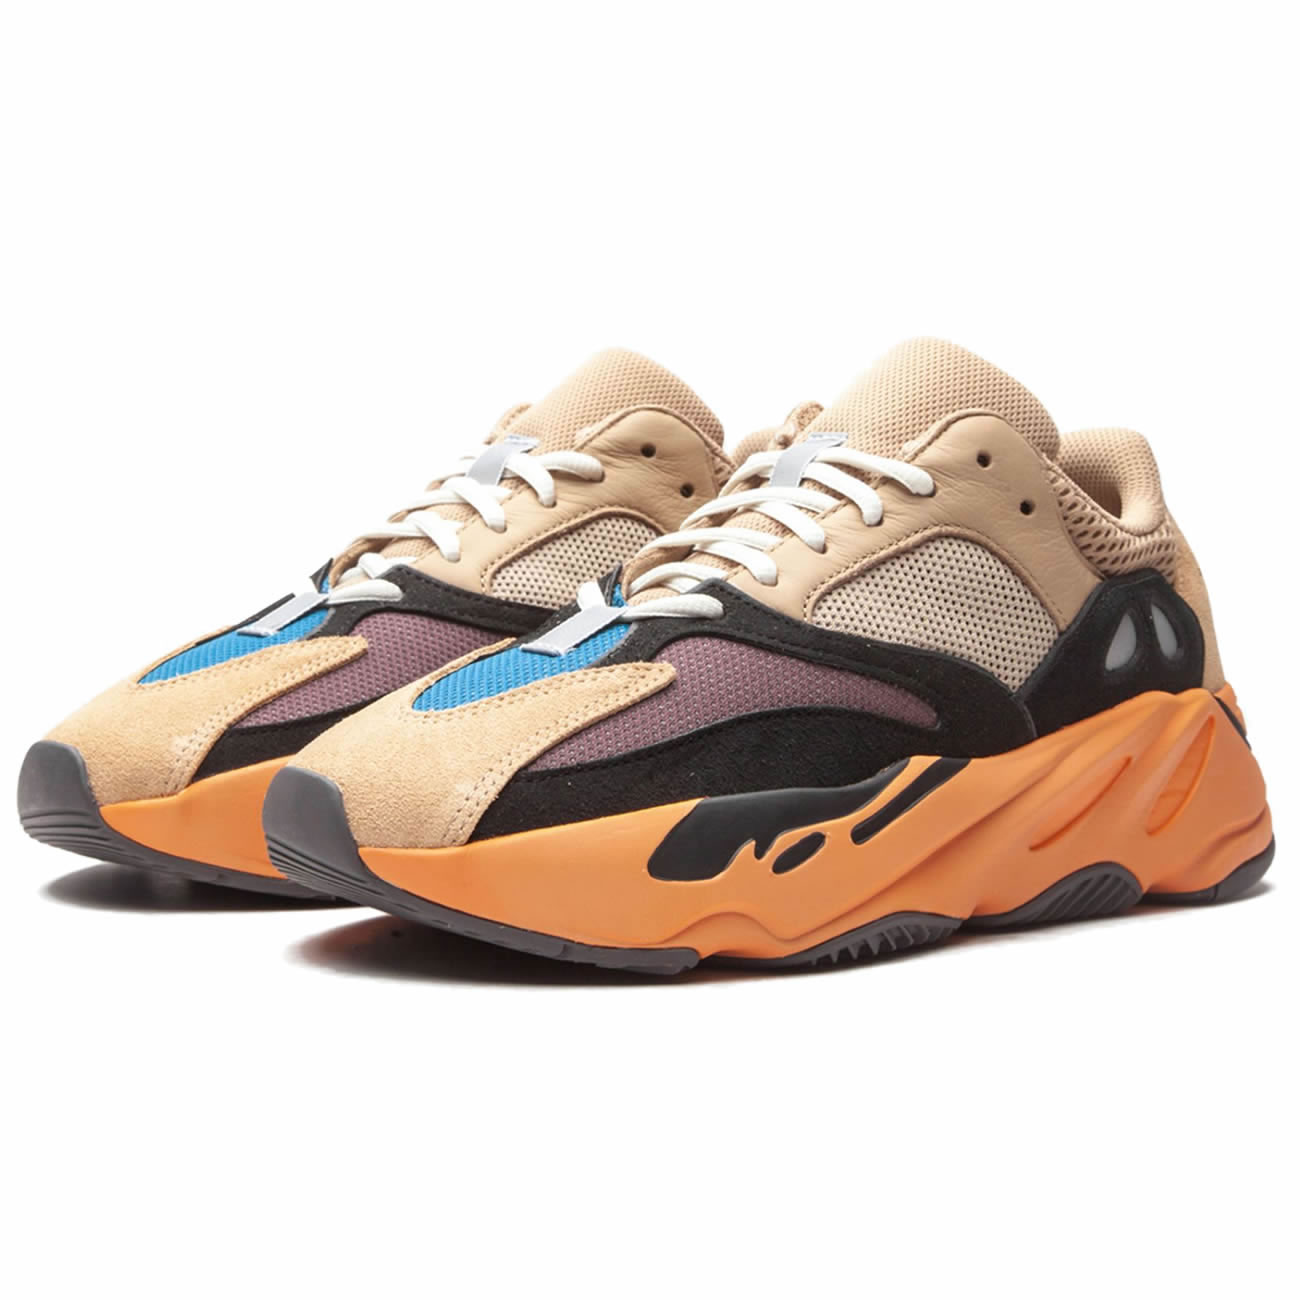 adidas Yeezy Boost 700 "Enflame Amber" GW0297